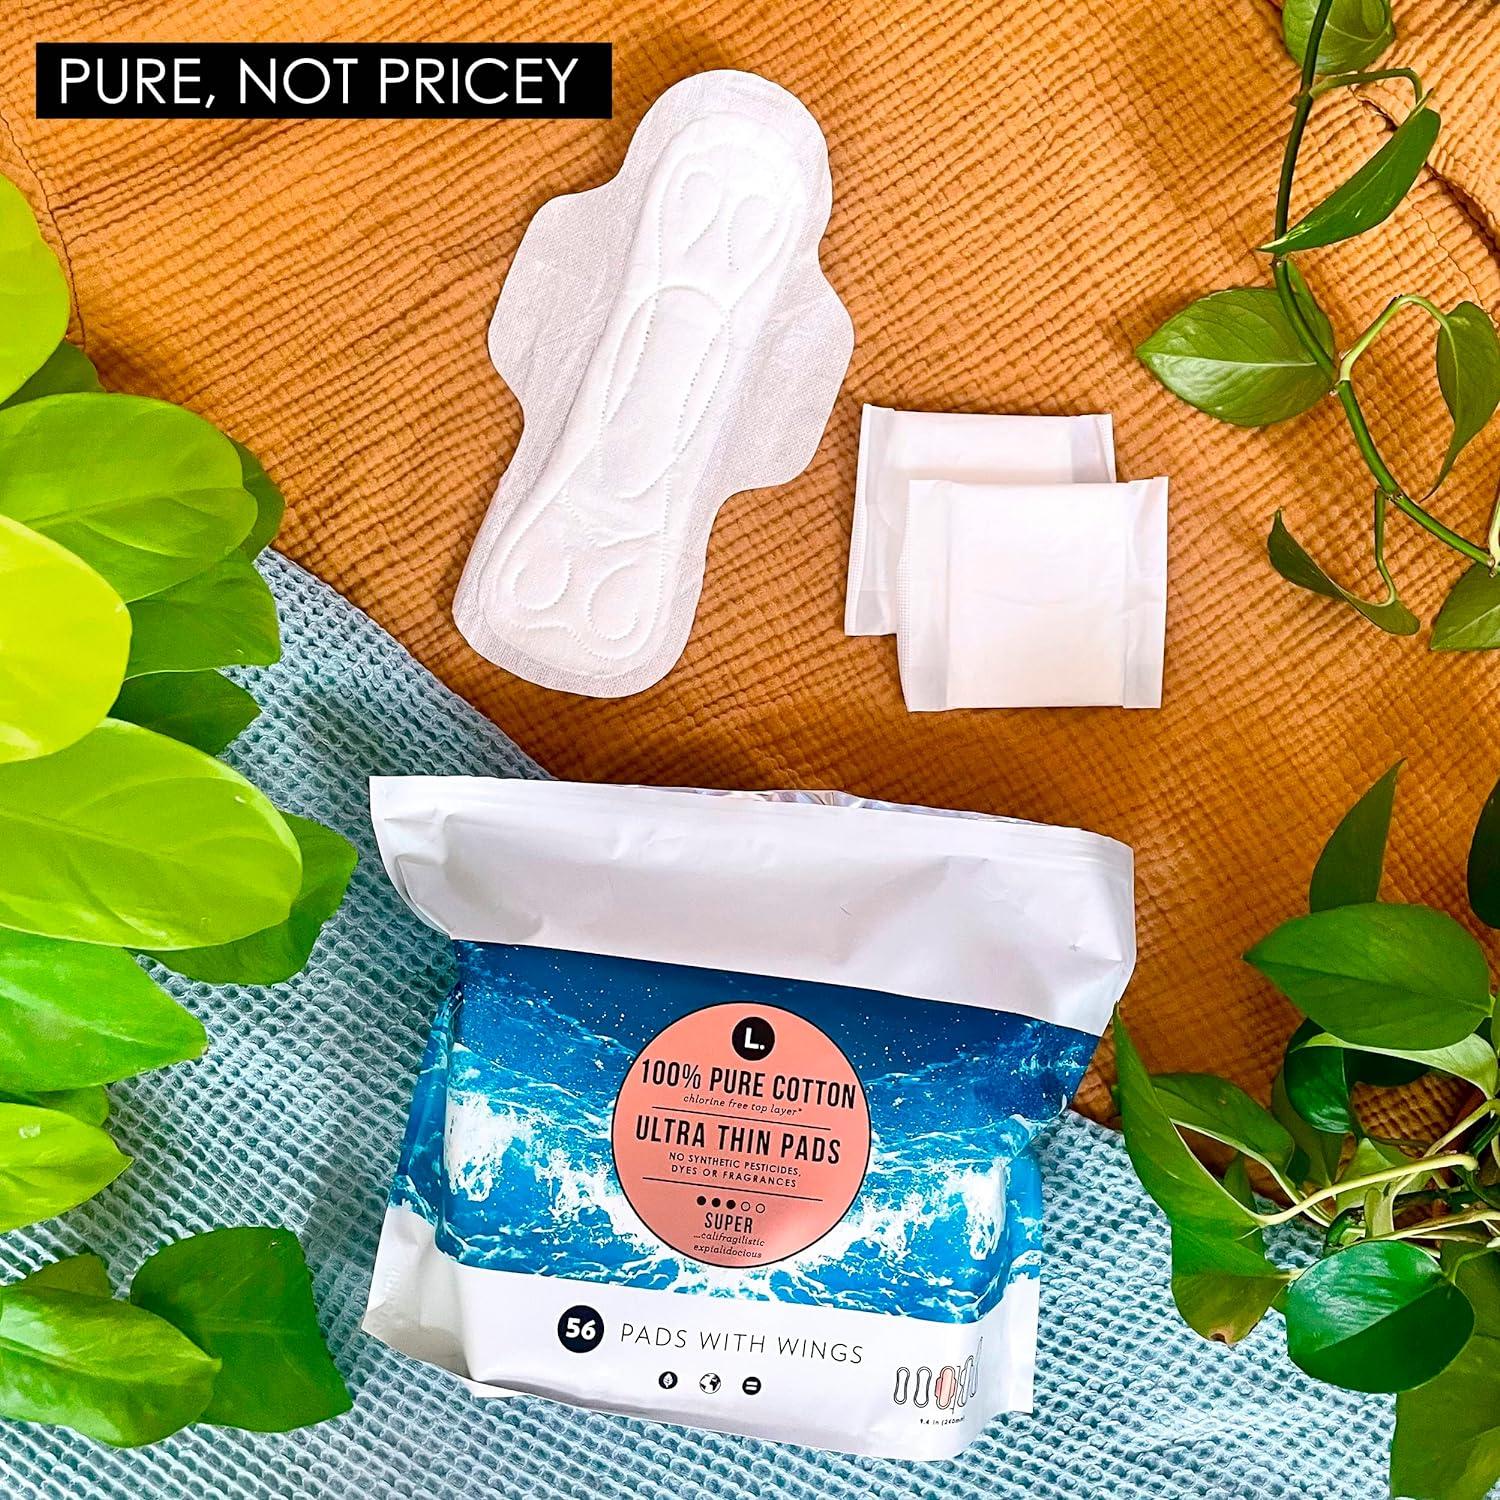 Buy L. 100% Pure Cotton Pads Ultra Super at